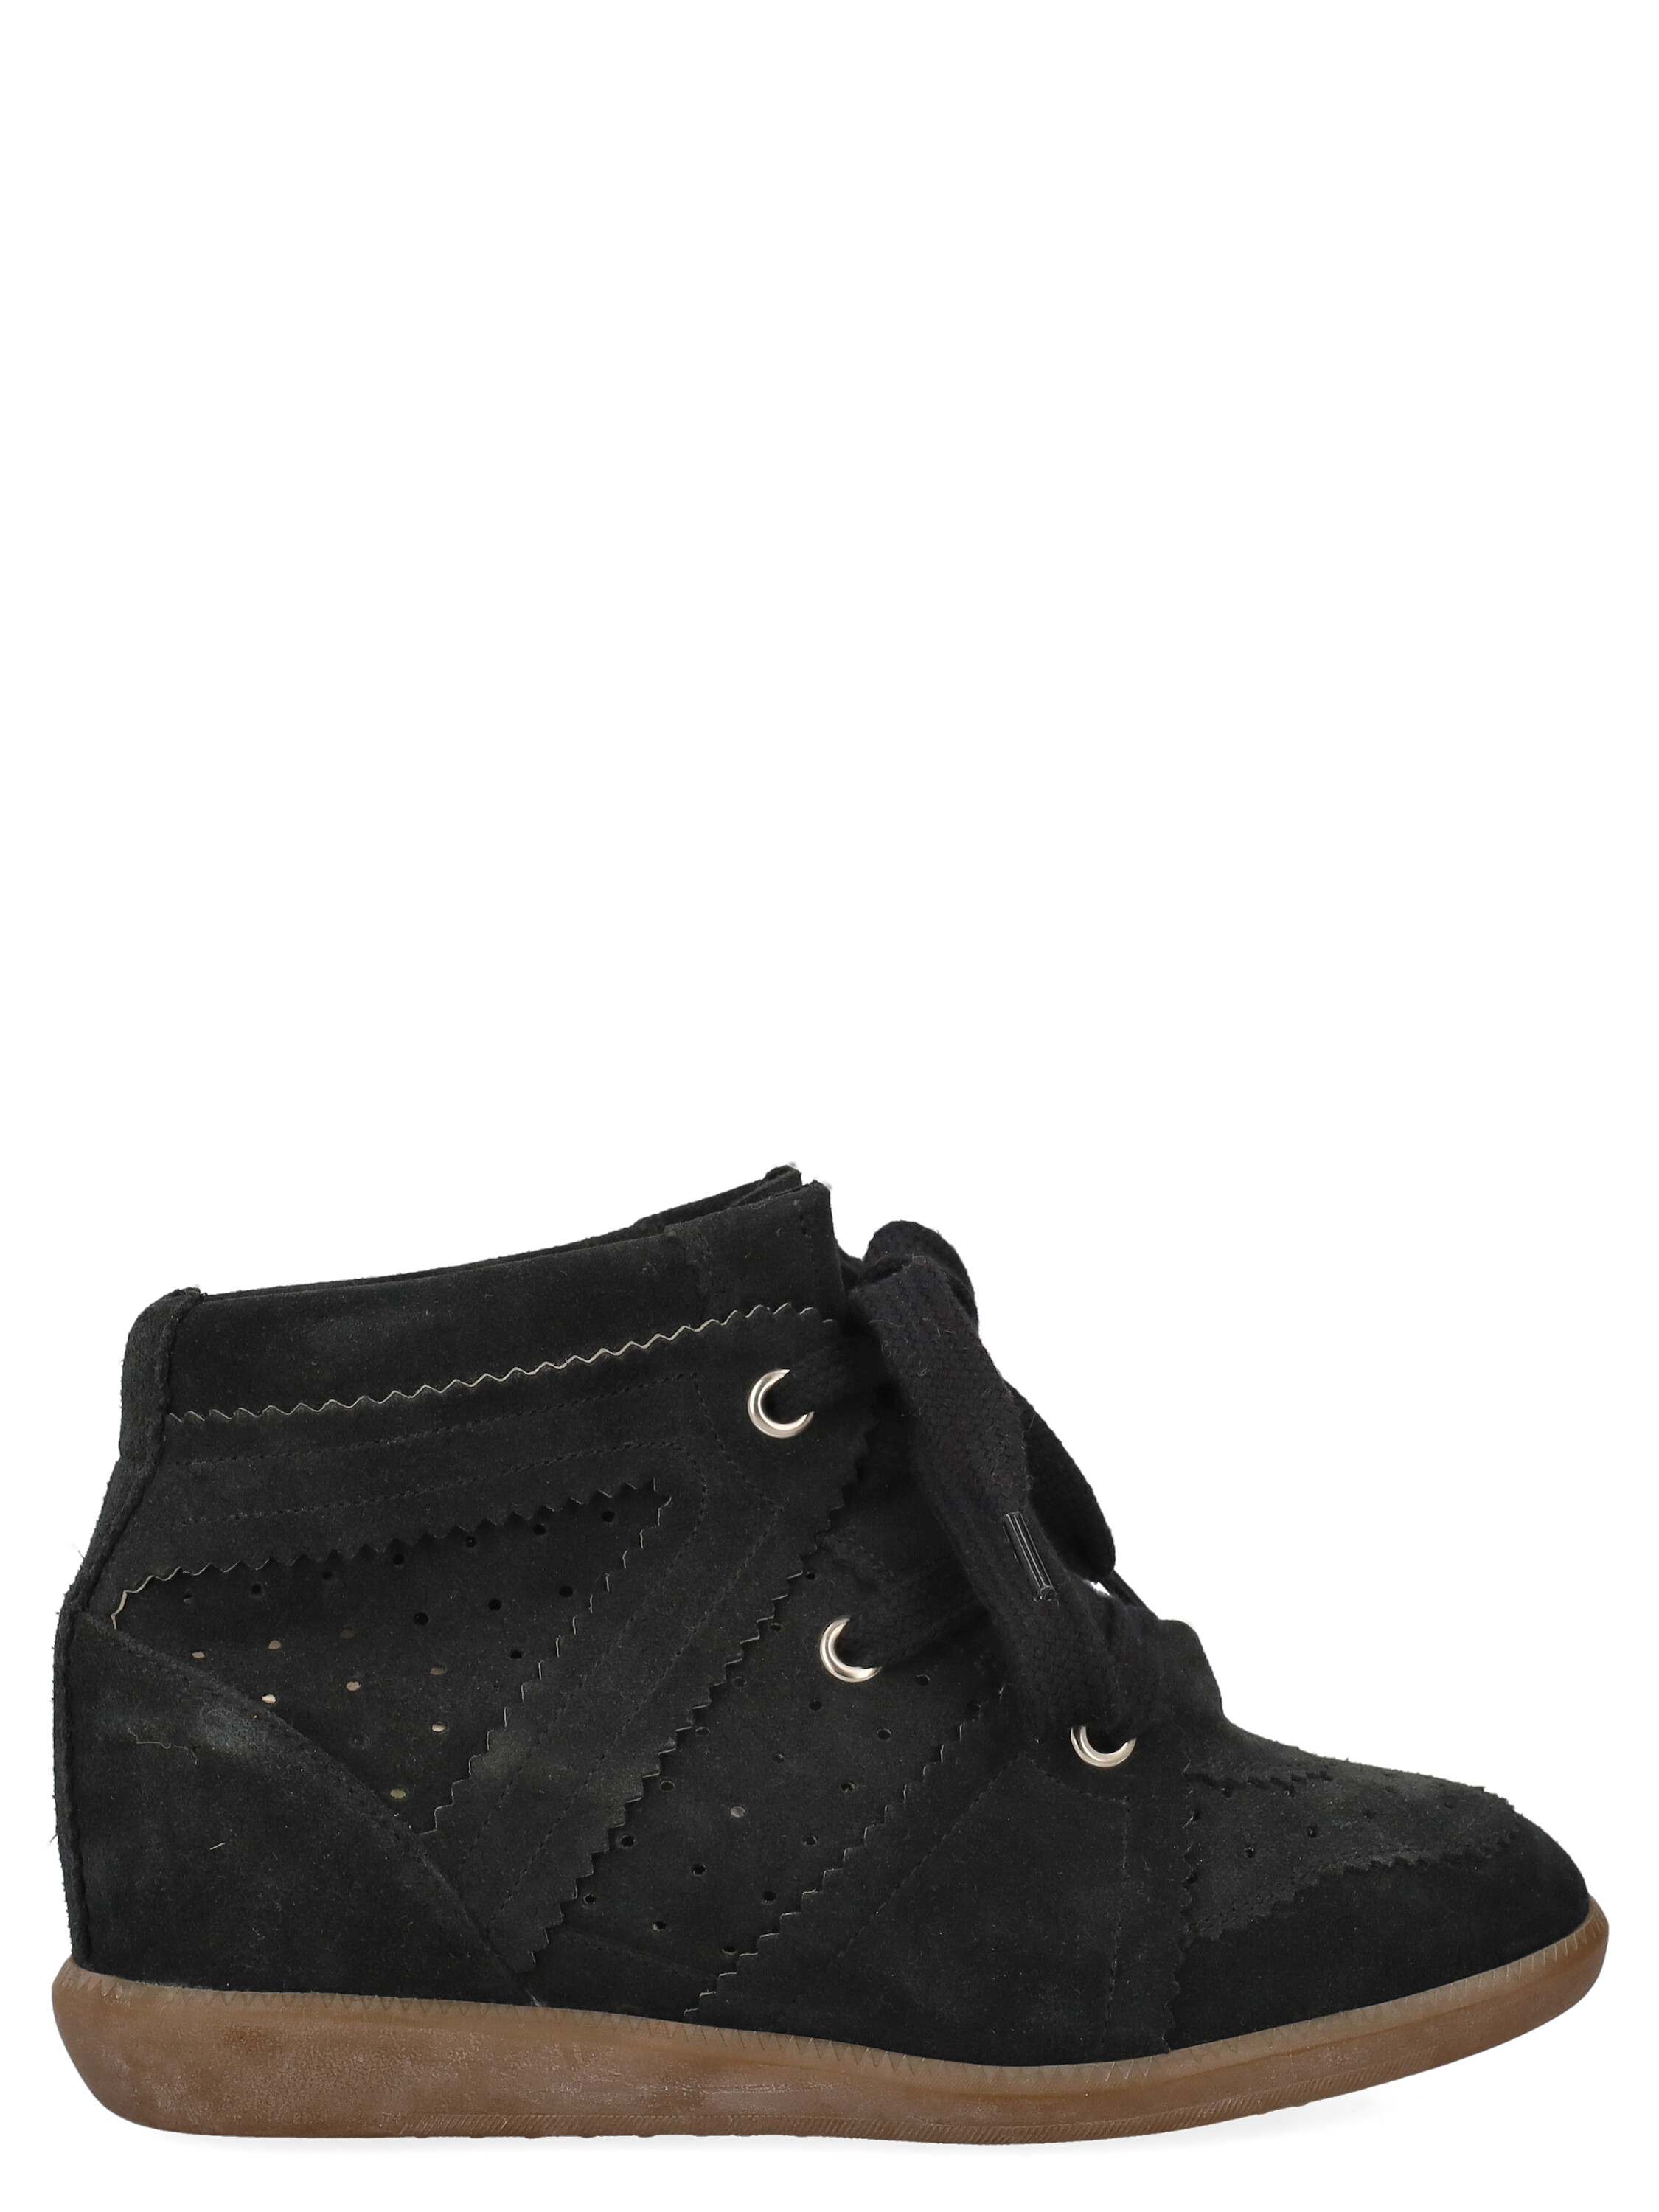 Pre-owned Isabel Marant Women's Sneakers -  - In Black Leather